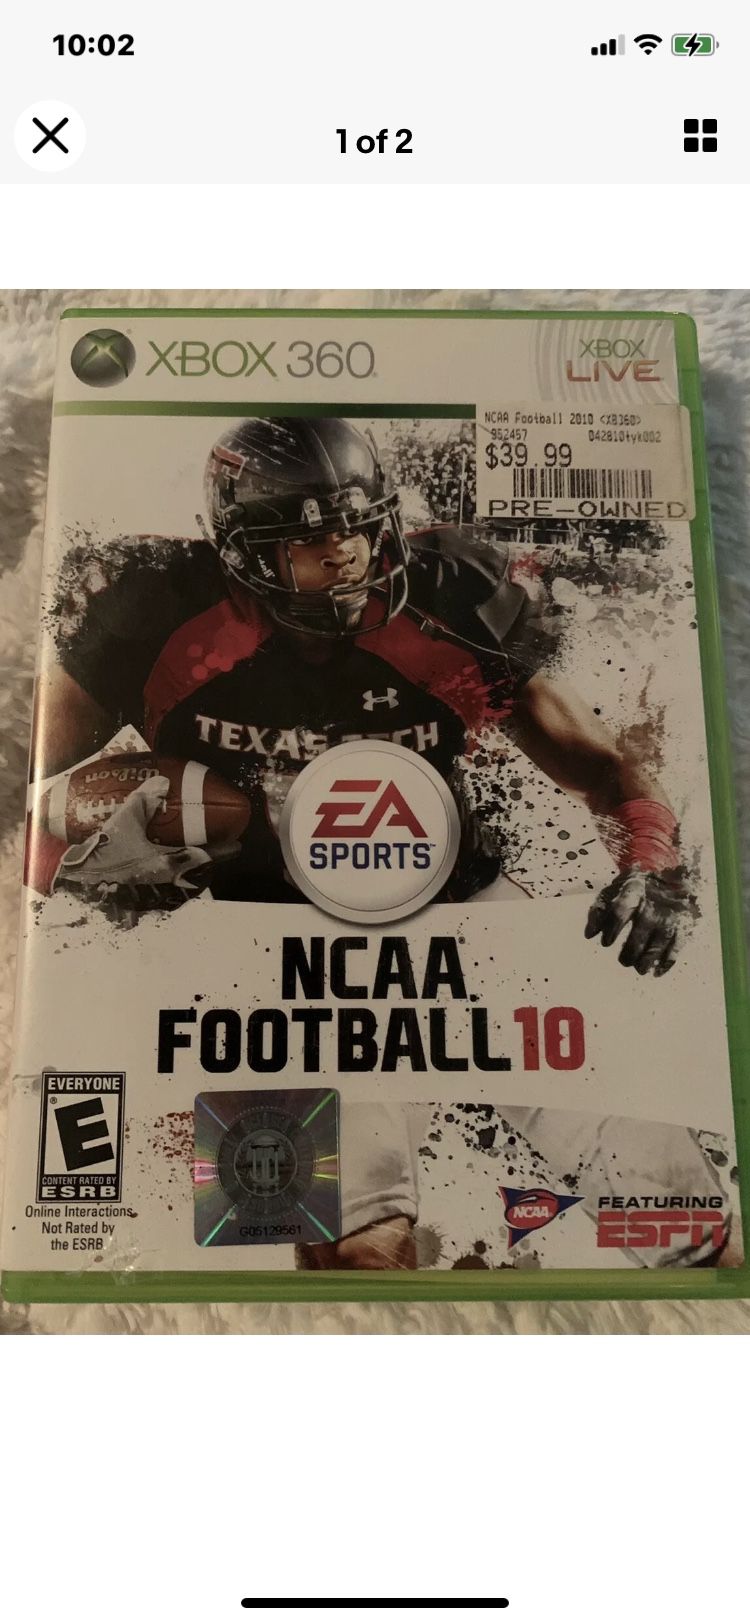  NCAA Football 10 (Microsoft Xbox 360, 2009). Condition is "Very Good". Shipped with USPS First Class.